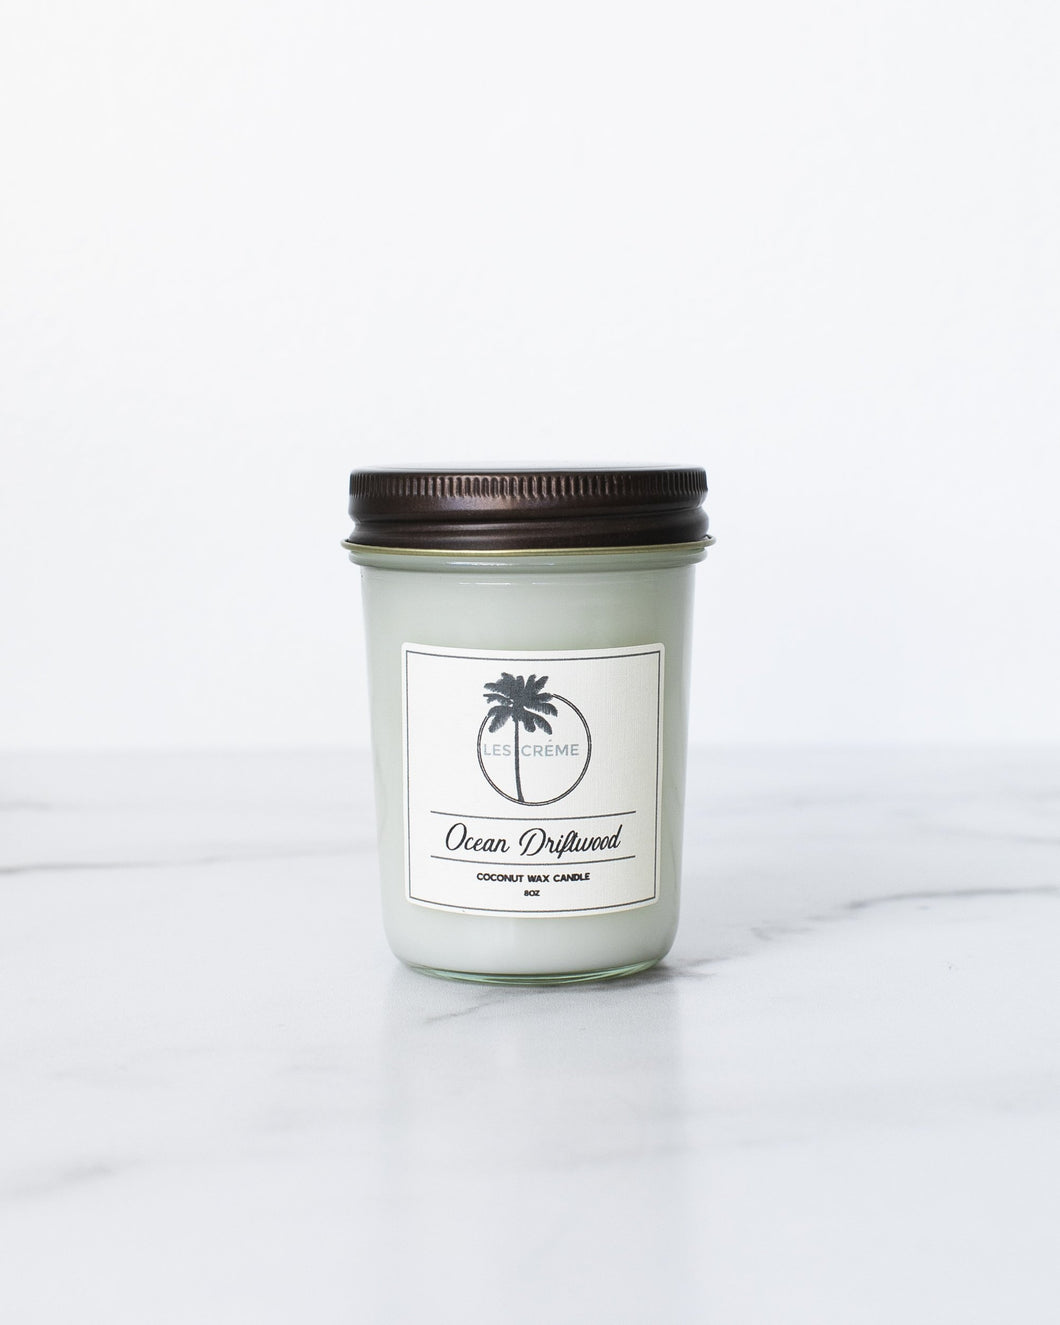 Ocean Driftwood Scent Coconut Wax Candle